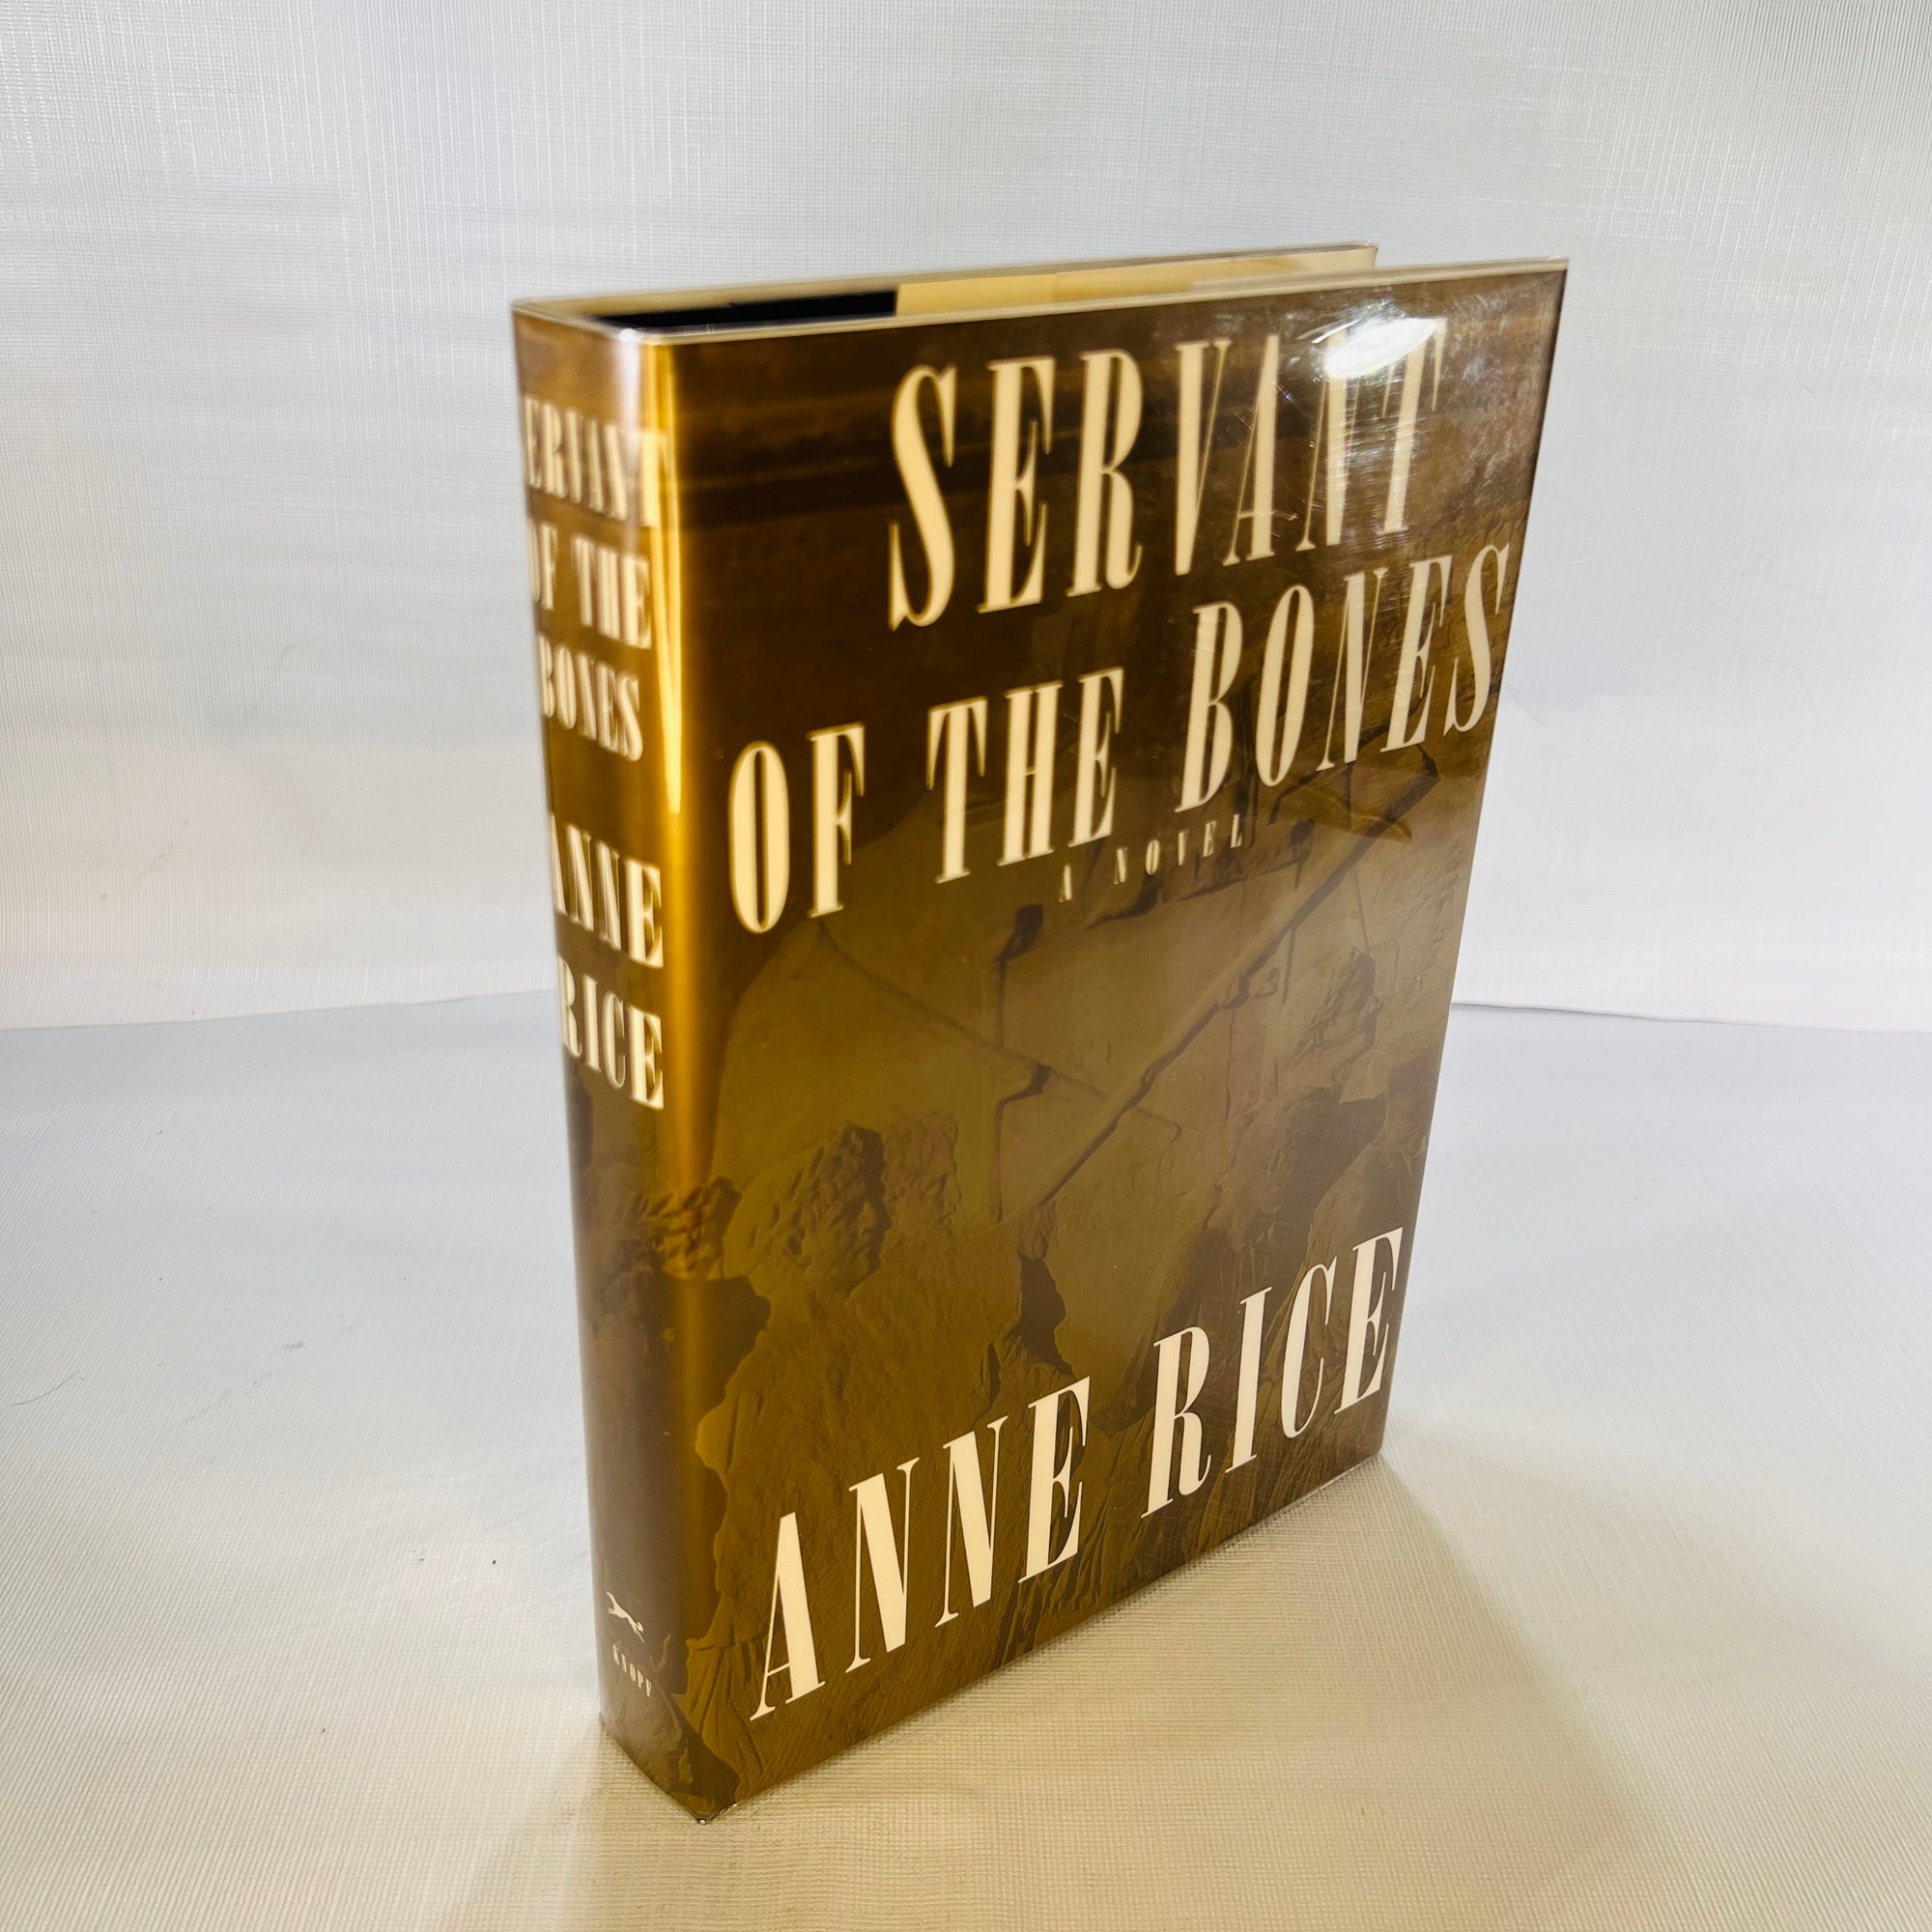 Servant of the Bones by Anne Rice 1996 First Edition Alfred A. Knopf